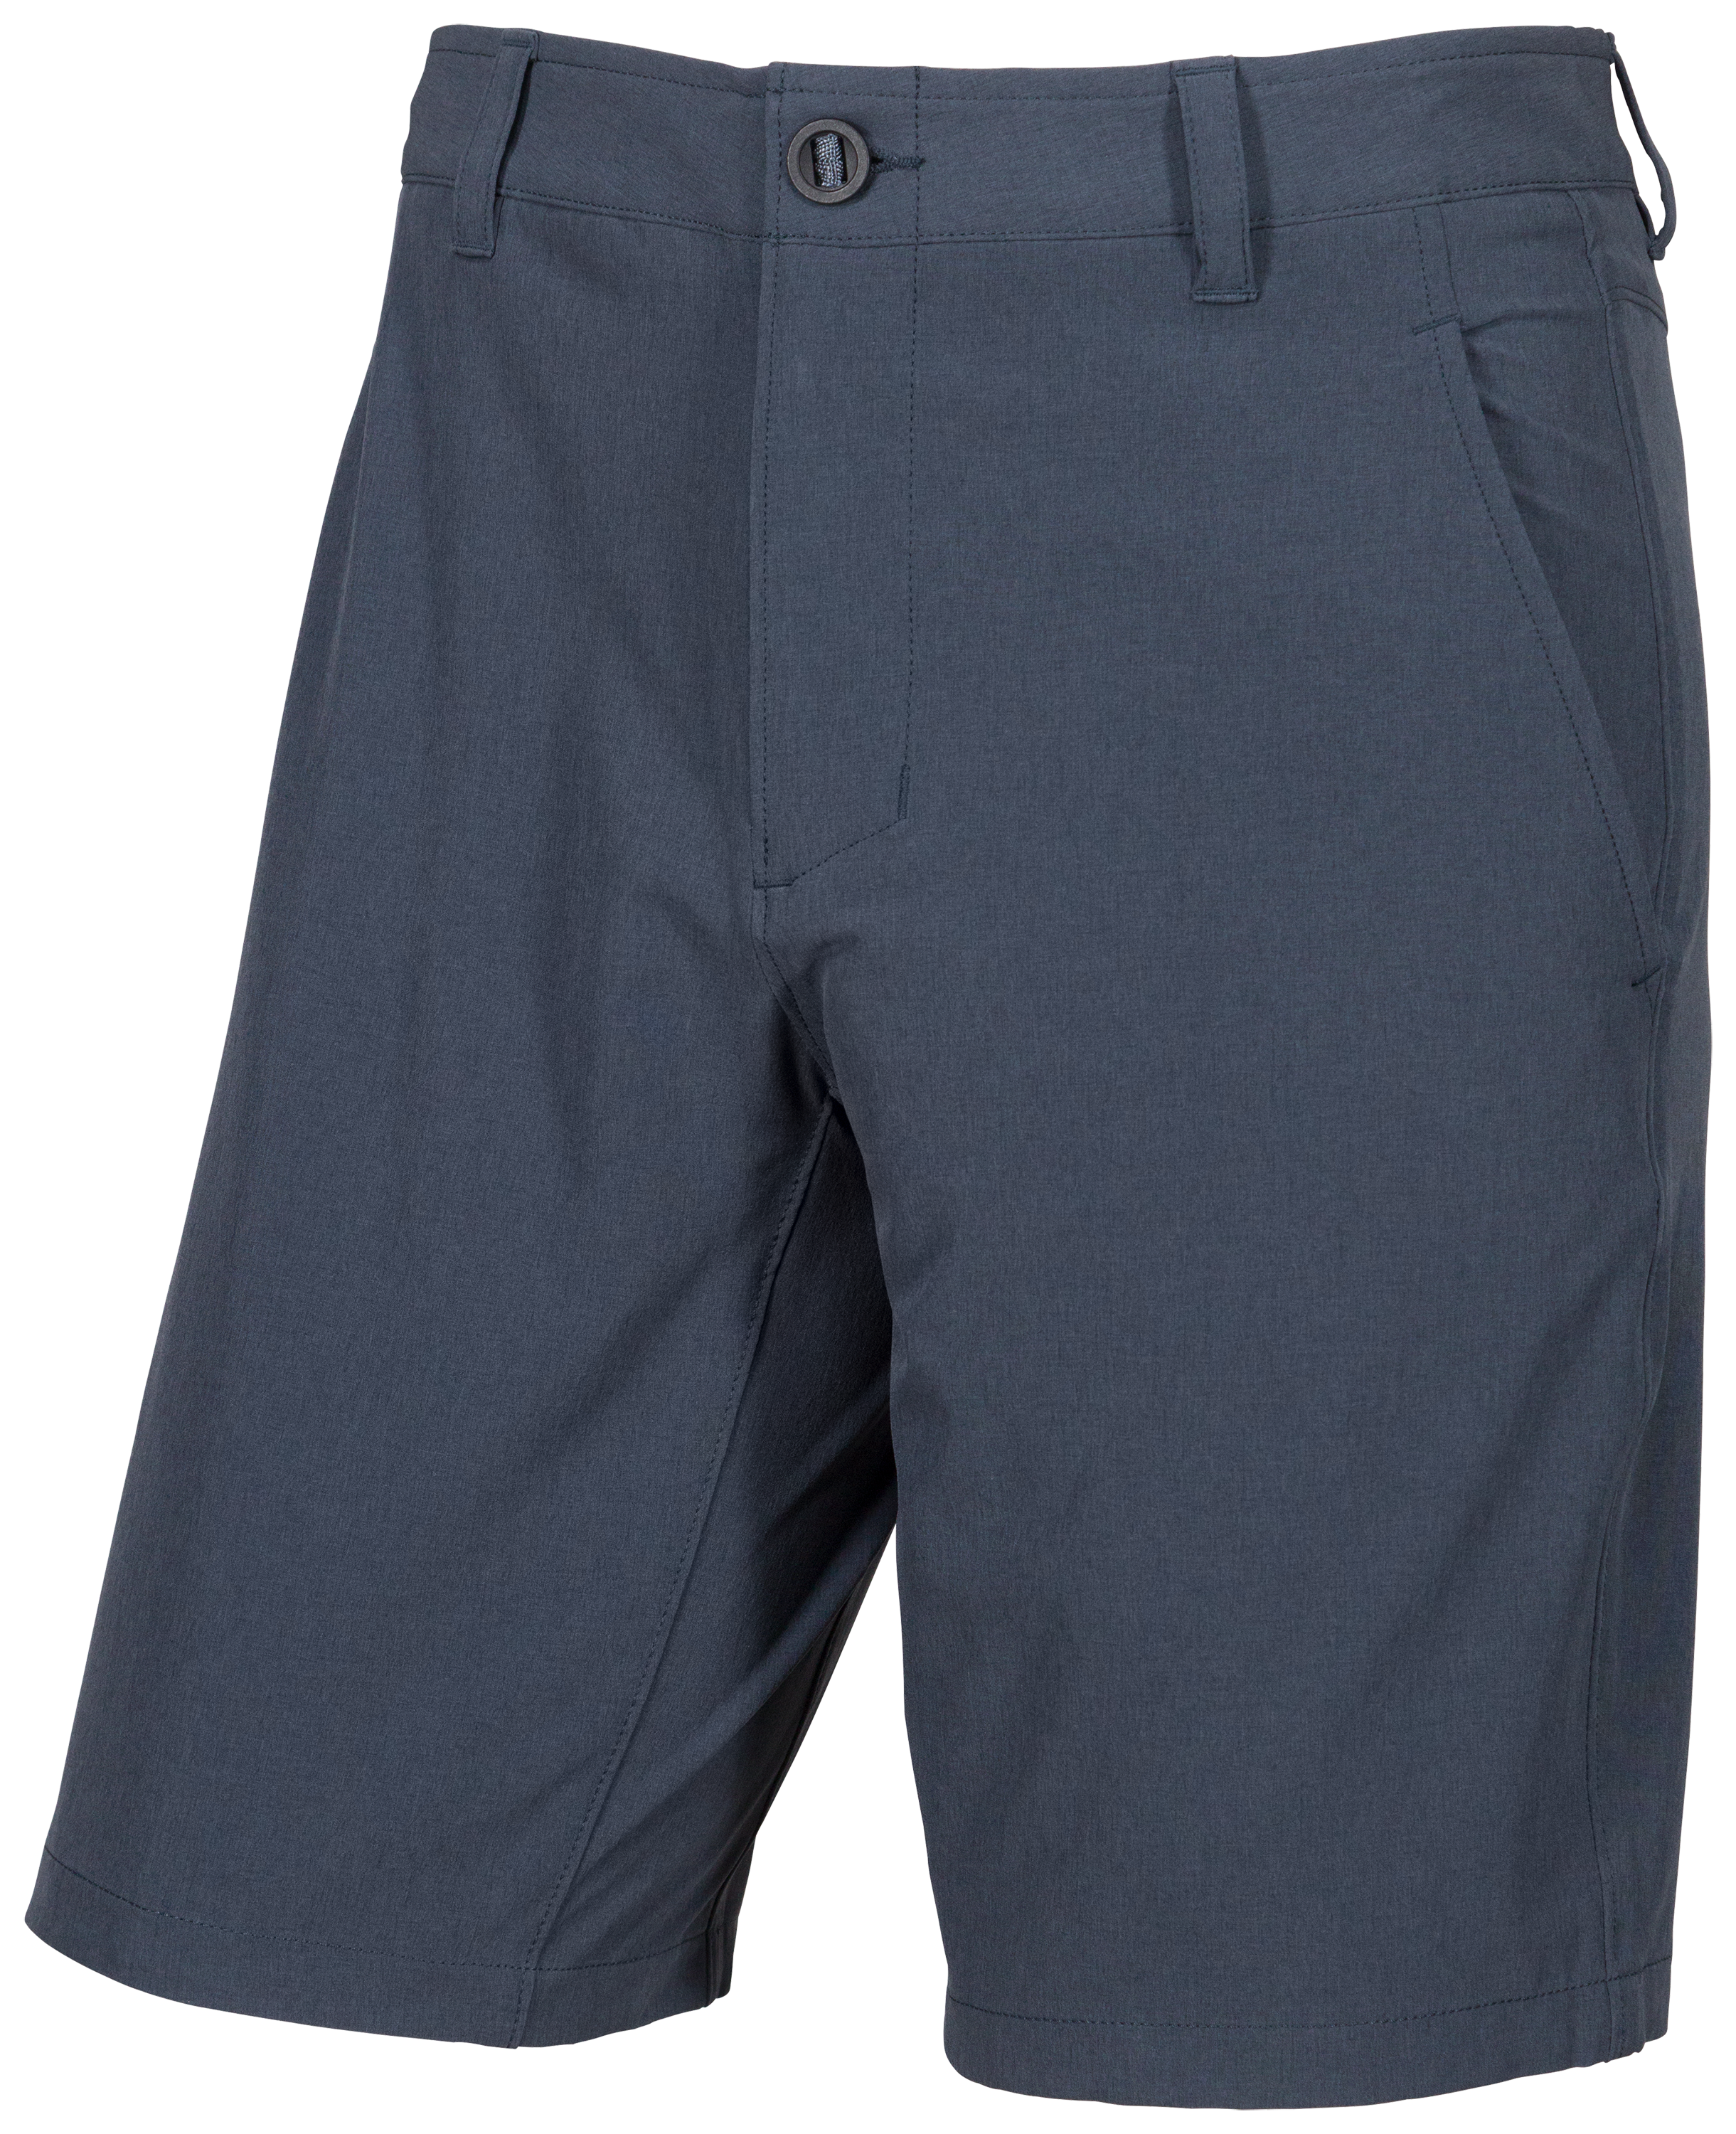 Under Armour Mantra Fishing Shorts for Men | Bass Pro Shops